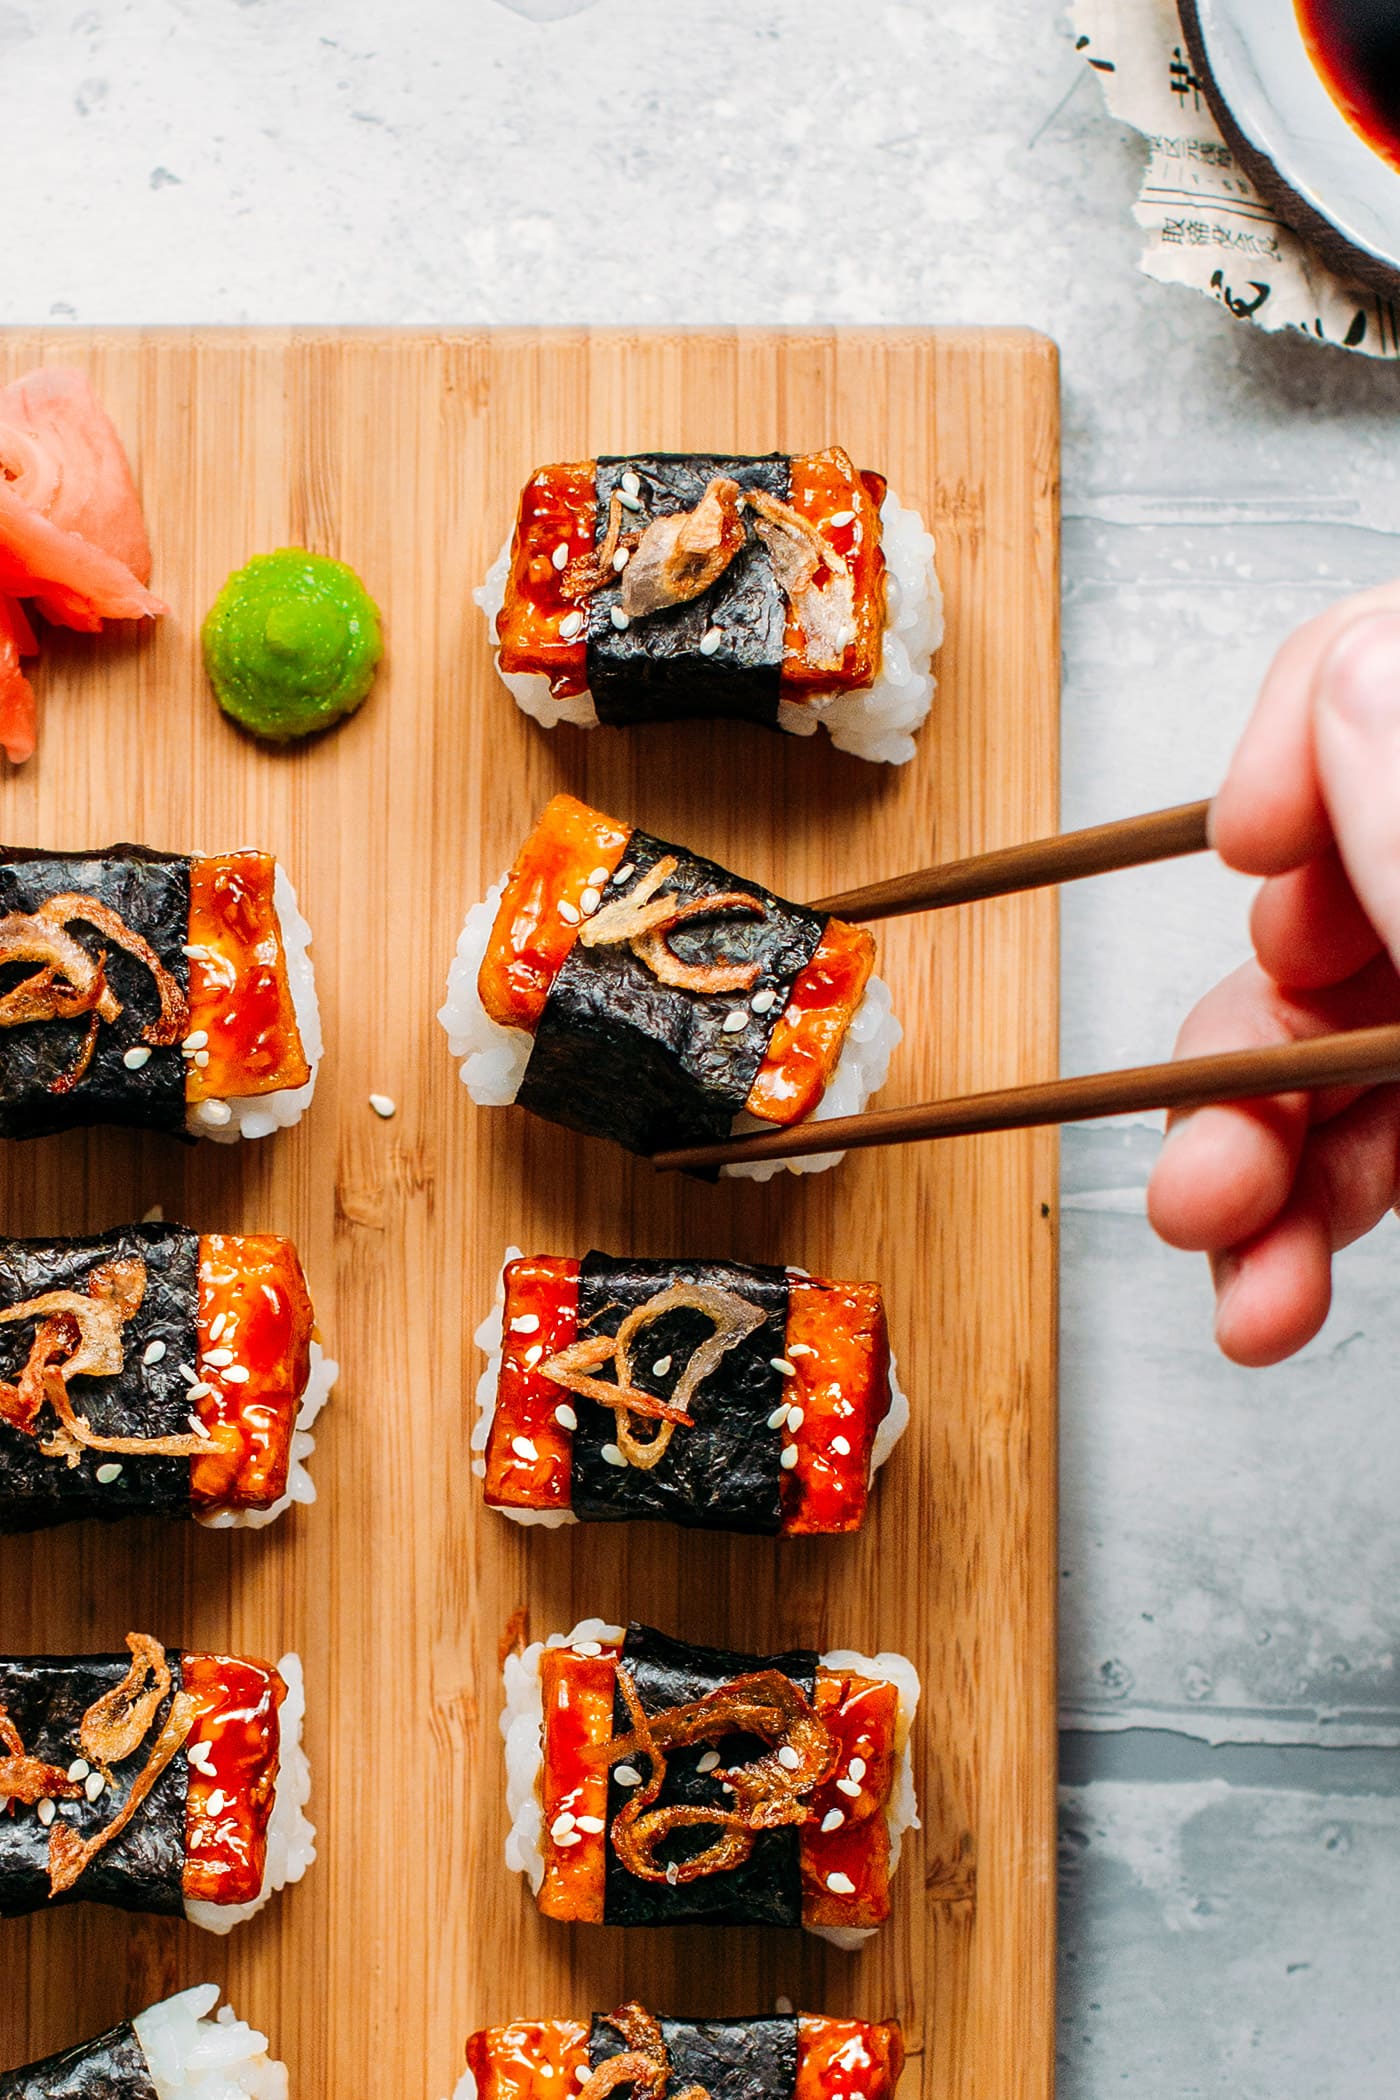 Teriyaki tofu nigiri pieces on top of a wooden board with a hand picking up a piece with wooden chopsticks.